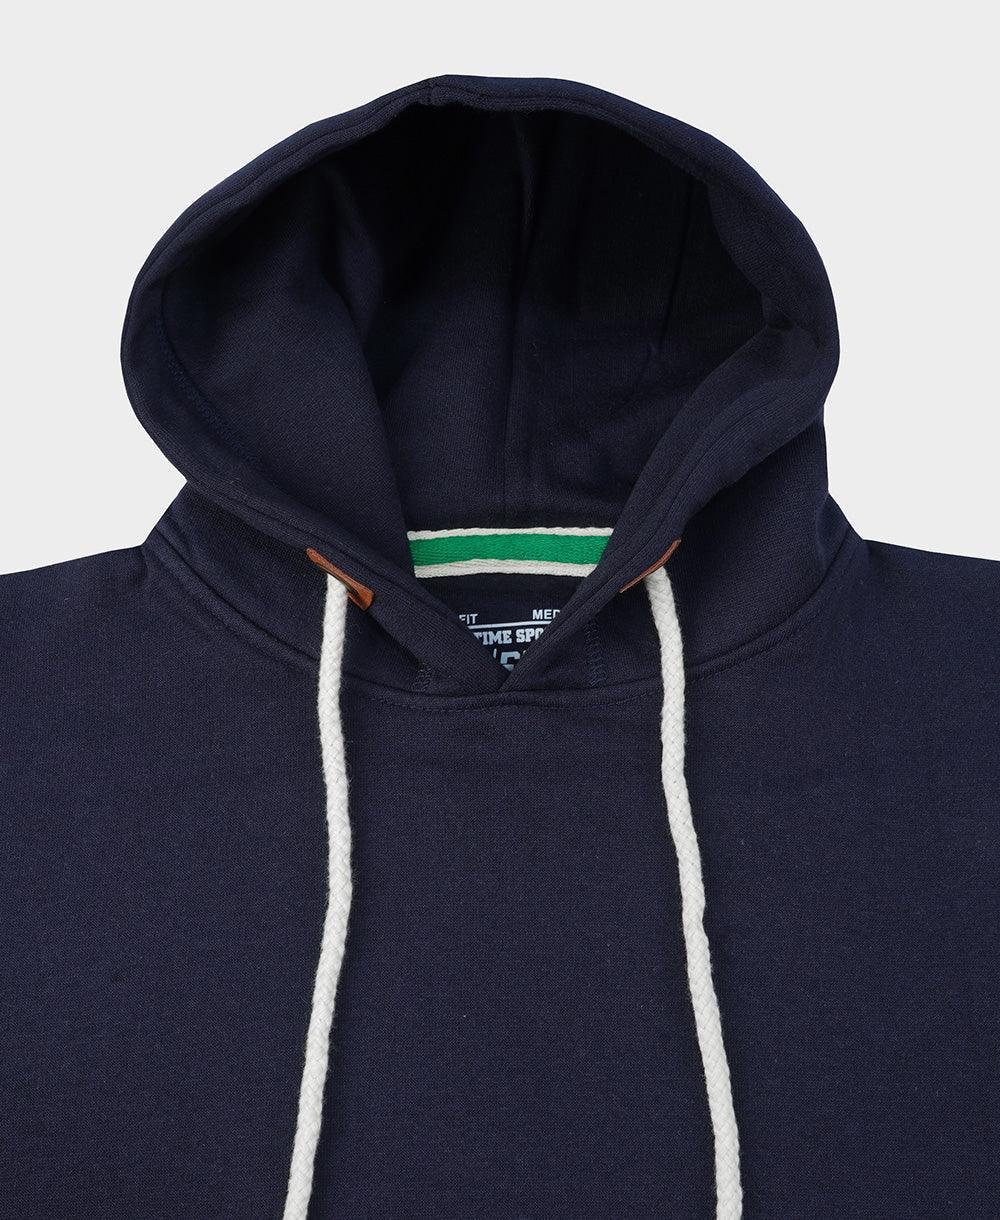 Hoodies | Navy - Full Time Sports Germany 